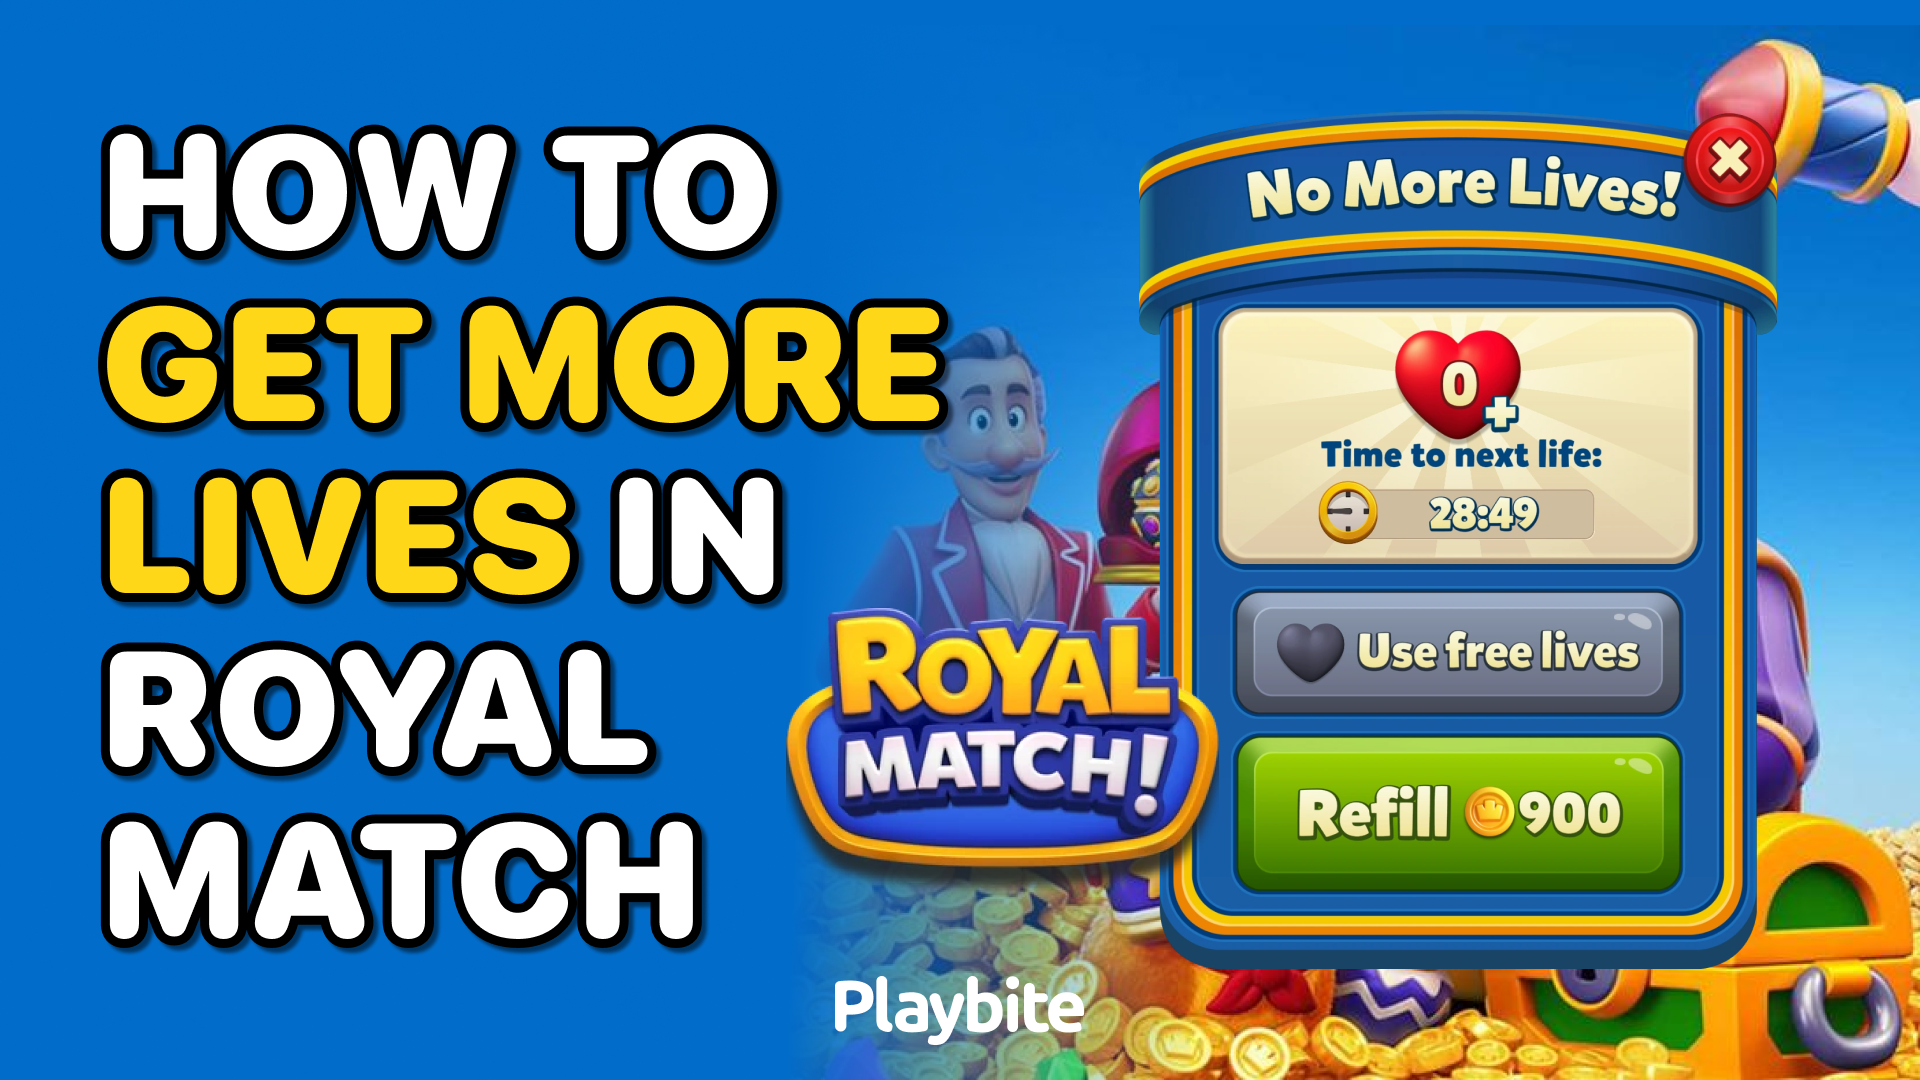 How To Get More Lives In Royal Match